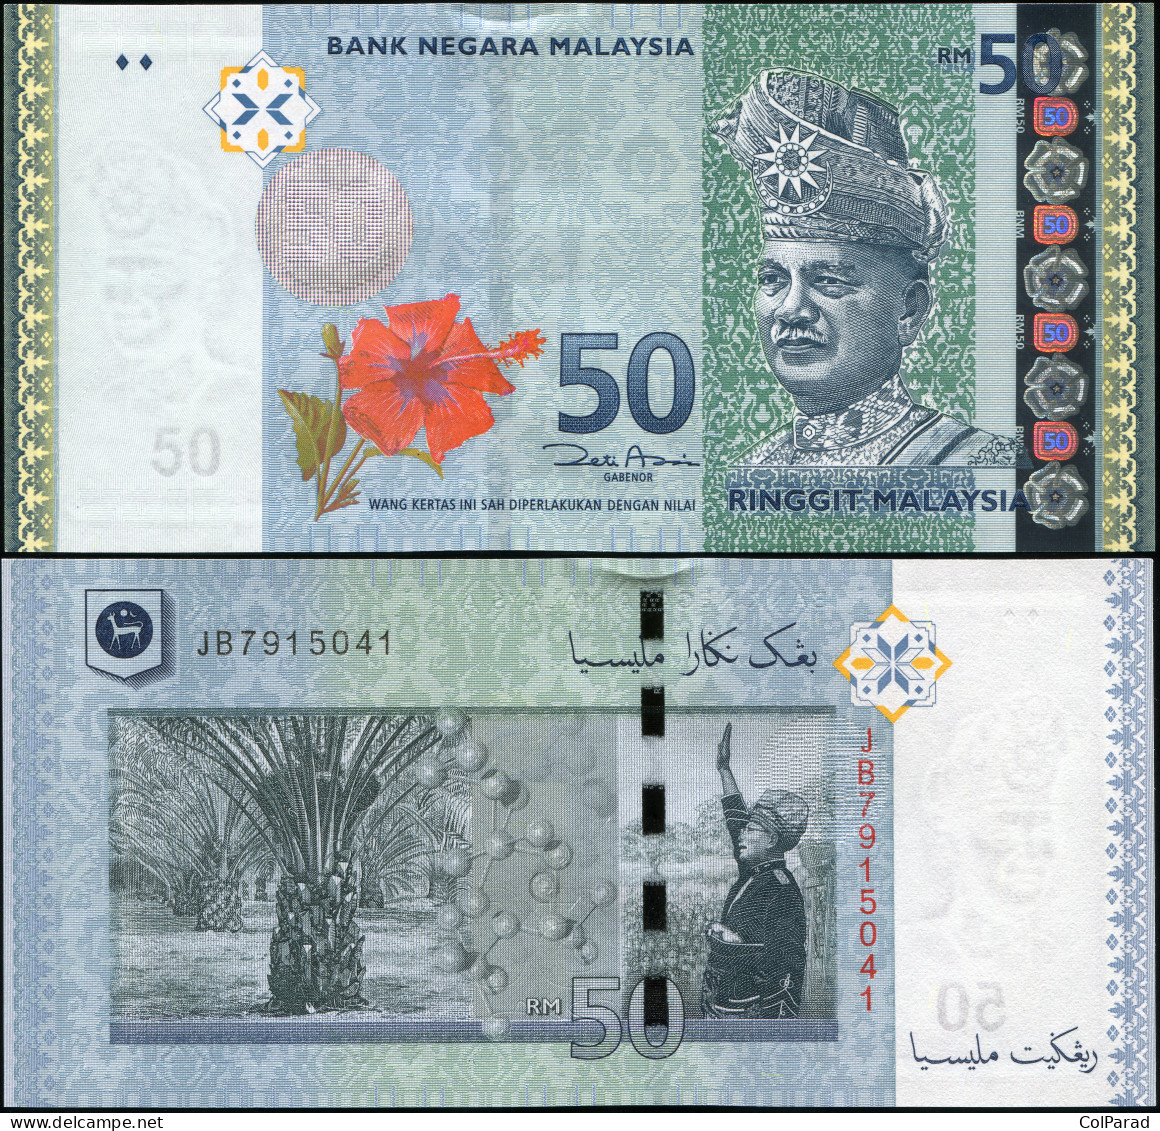 MALAYSIA 50 RINGGIT - ND (2009) - Paper Unc - P.50a Banknote - Maleisië